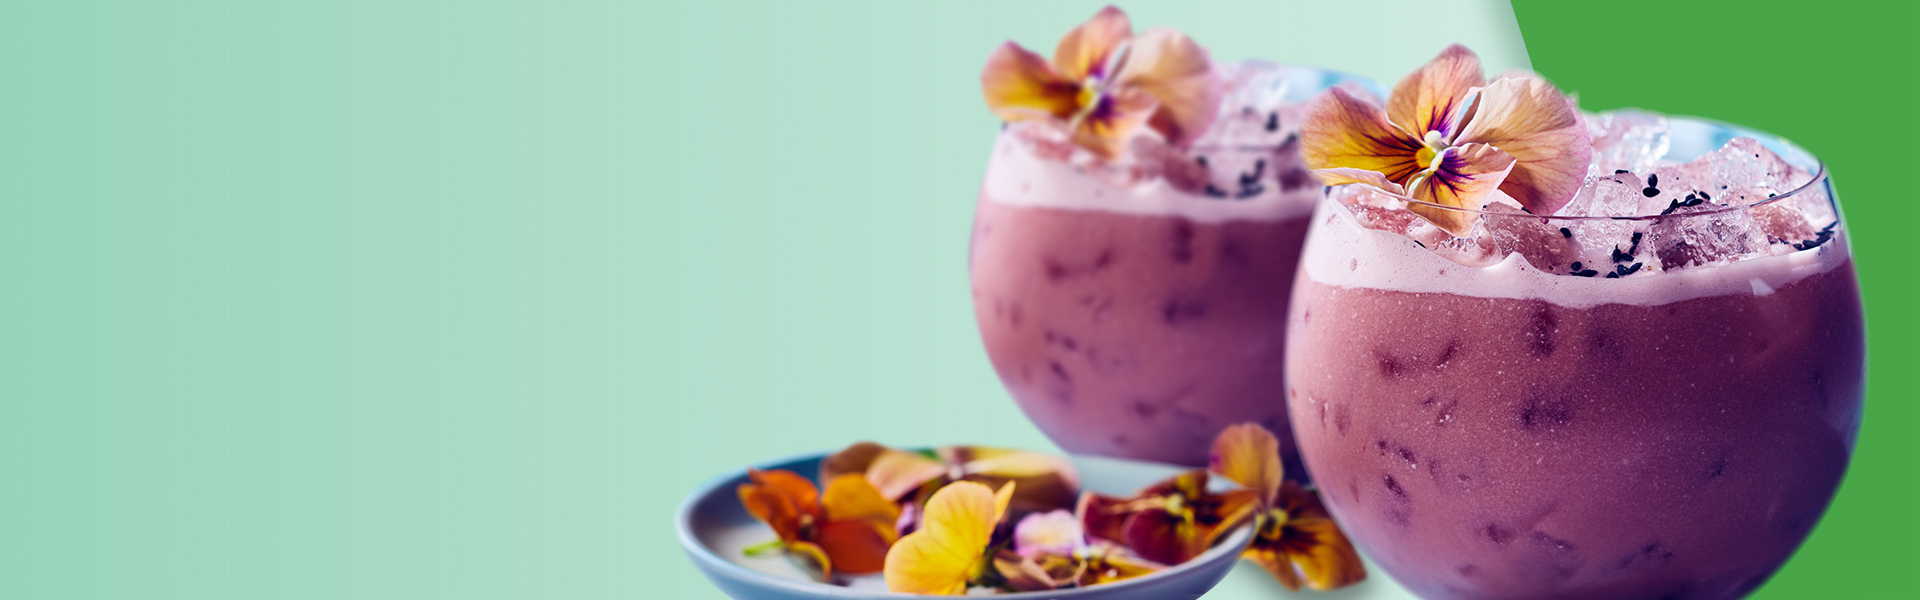 Low rounded glass of purple iced cocktail with edible floral garnish